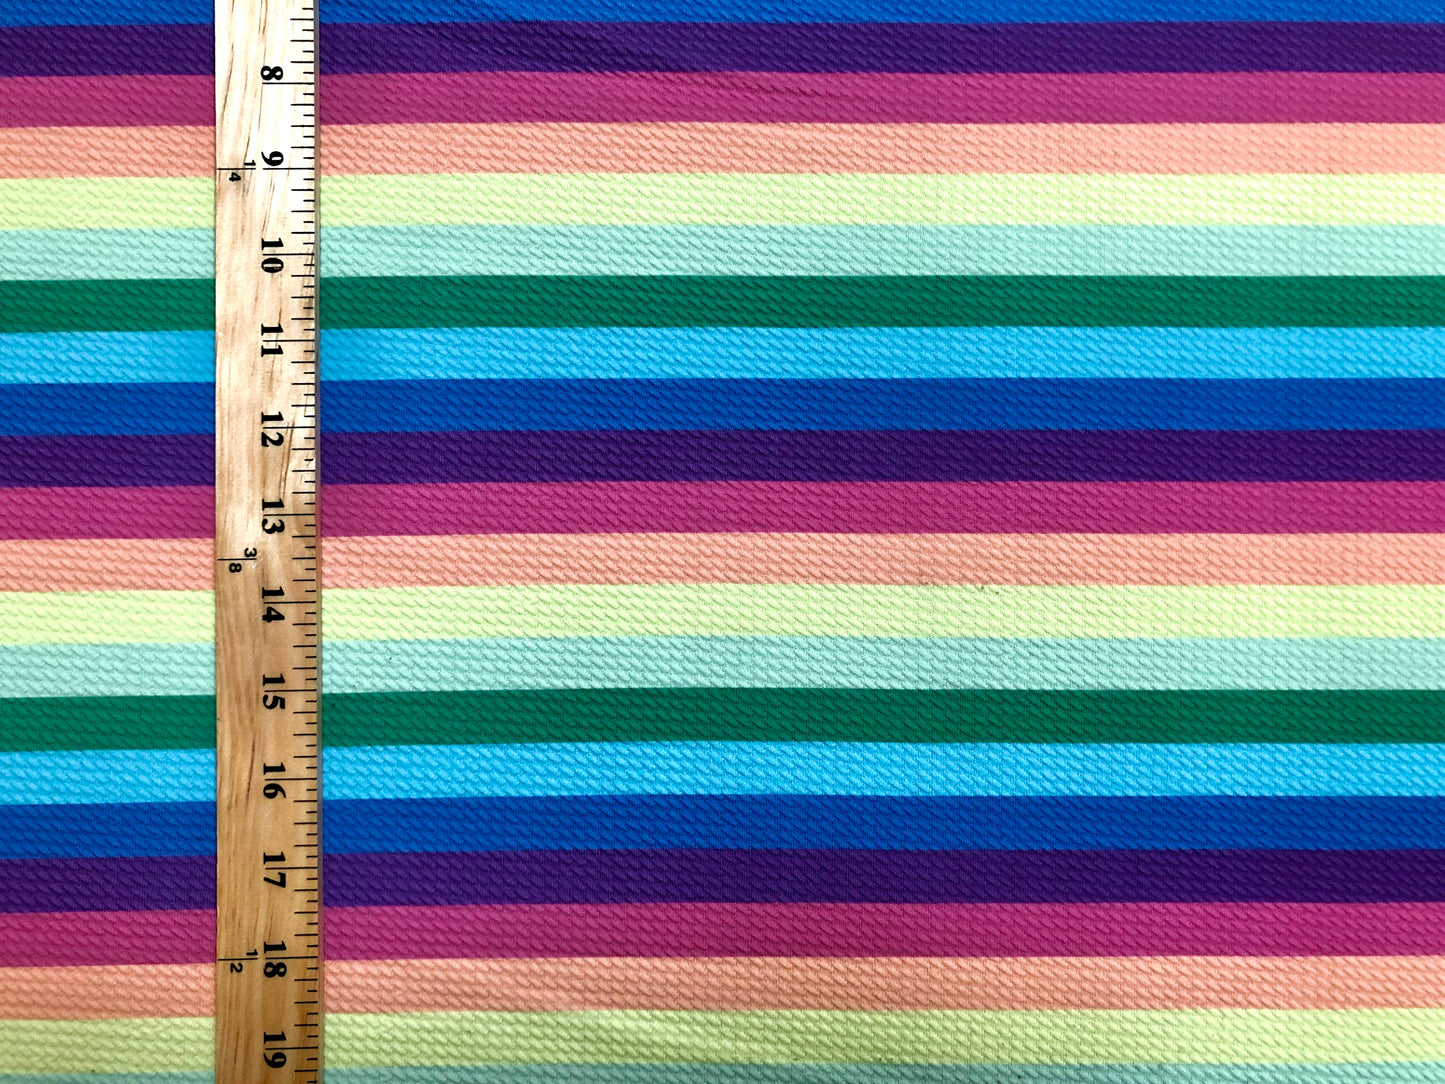 Bullet Knit Printed Fabric-Blue Purple Rainbow Horizontal Stripes-BPR182-Sold by the Yard